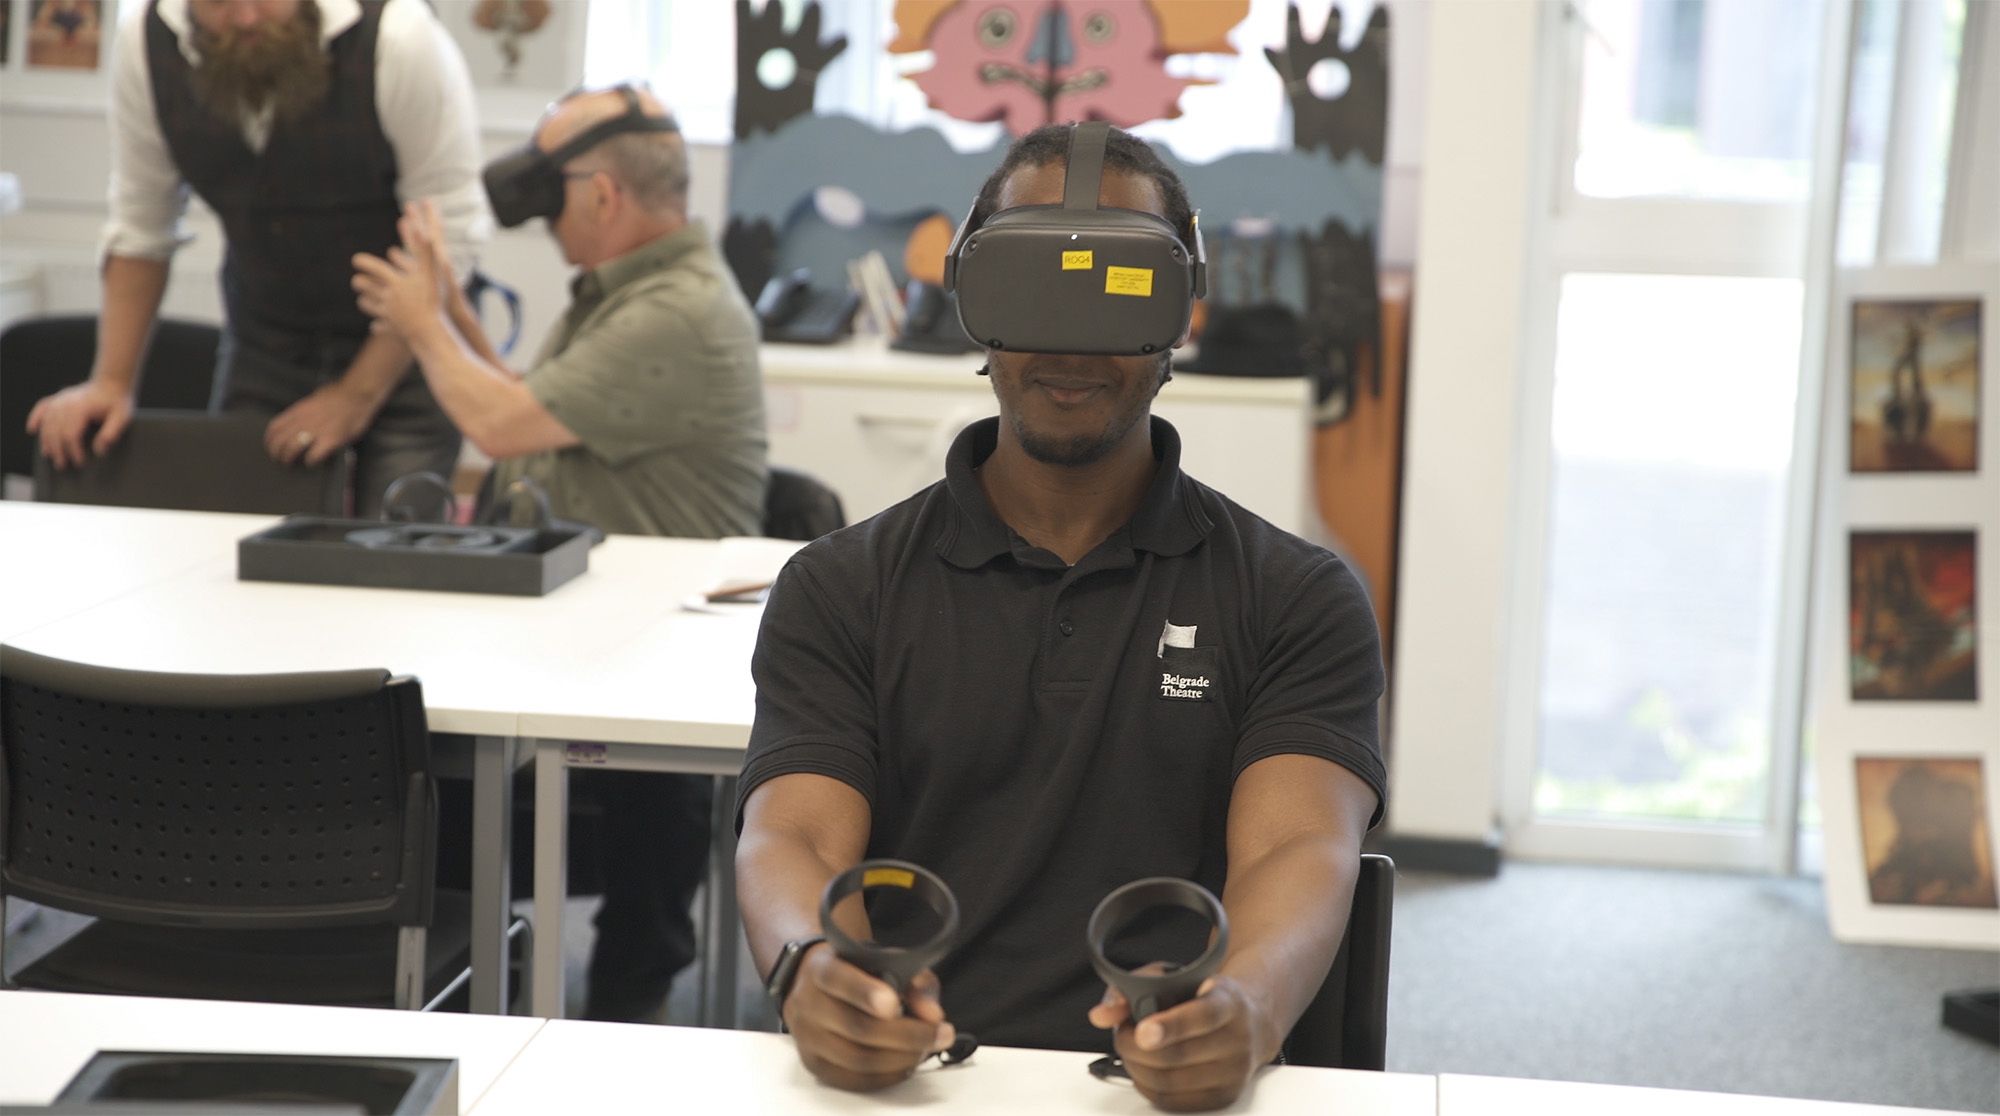 A man sitting at a table wearing a VR headset and using a VR handset. In the background are two other people talking